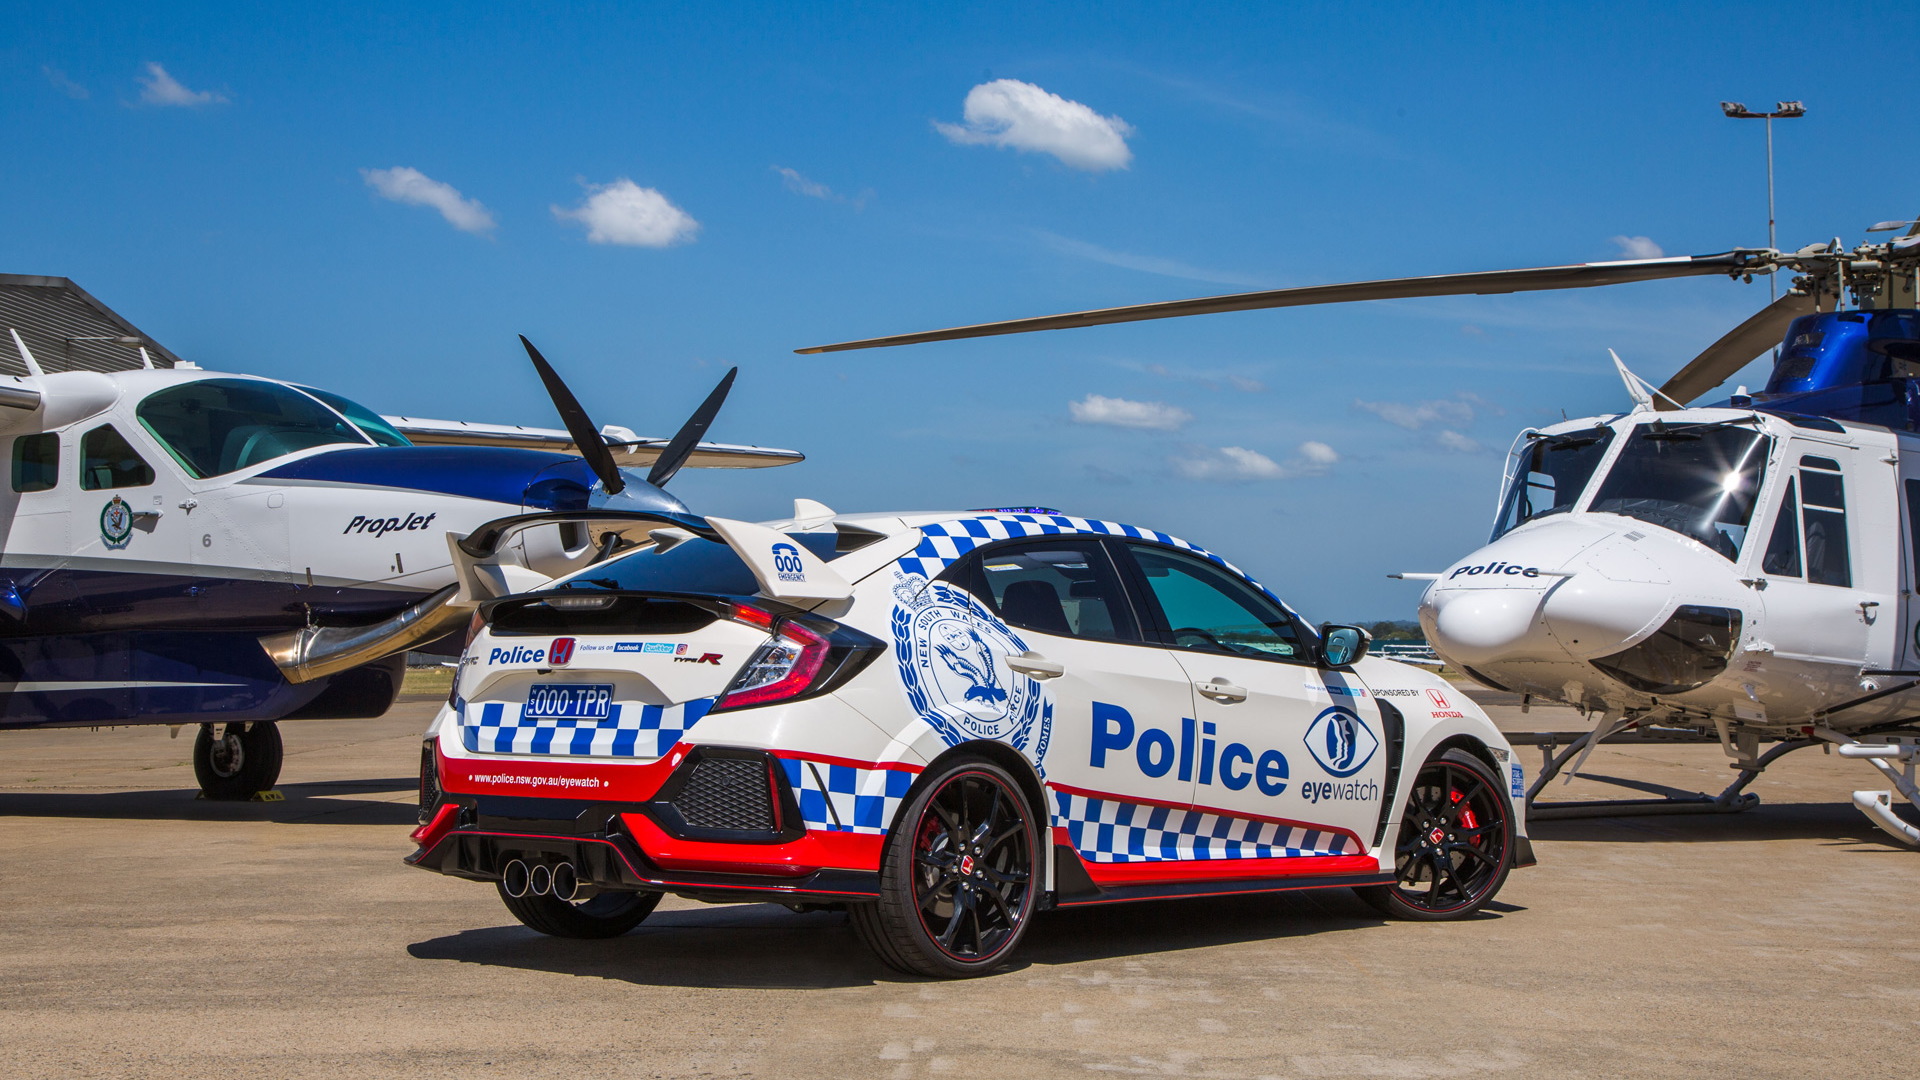 Honda Civic Type R police car for New South Wales, Australia